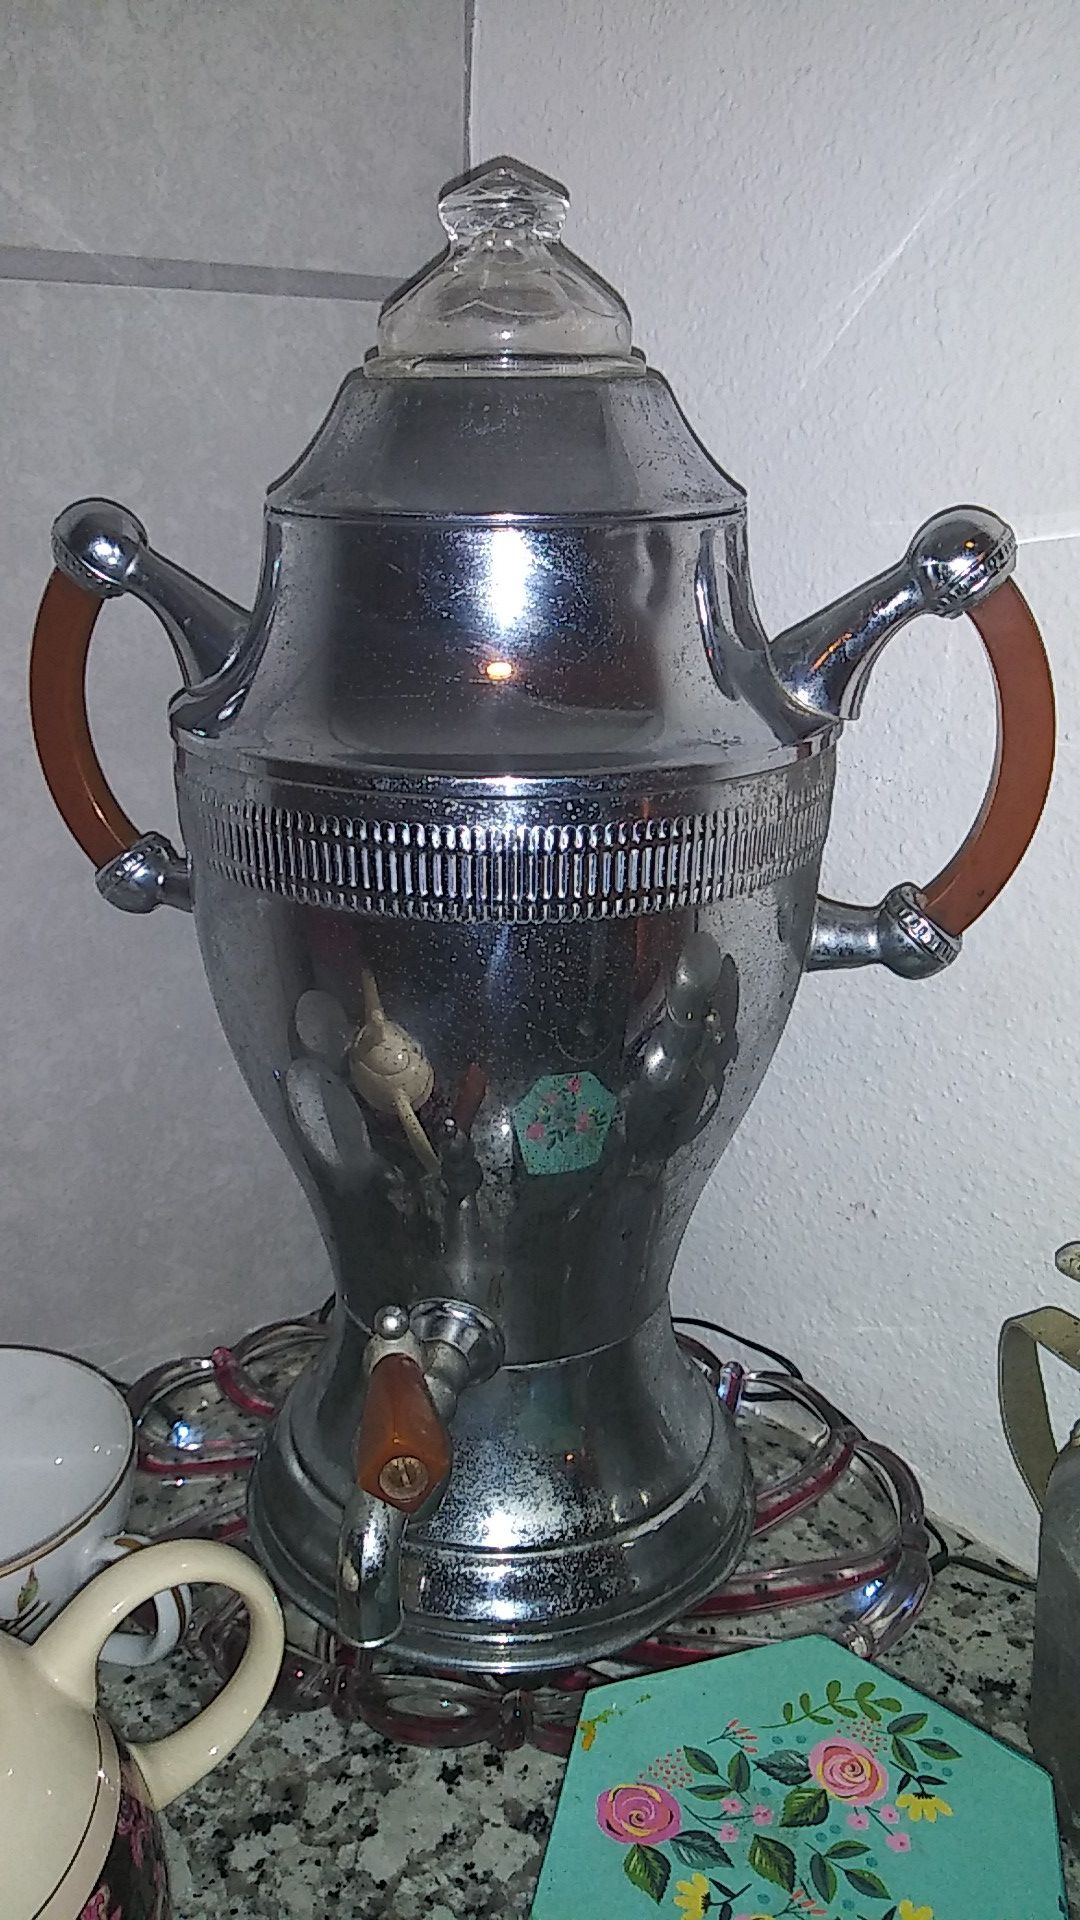 Antique coffee server. By continental. #8 Chromium. Old style percolator.